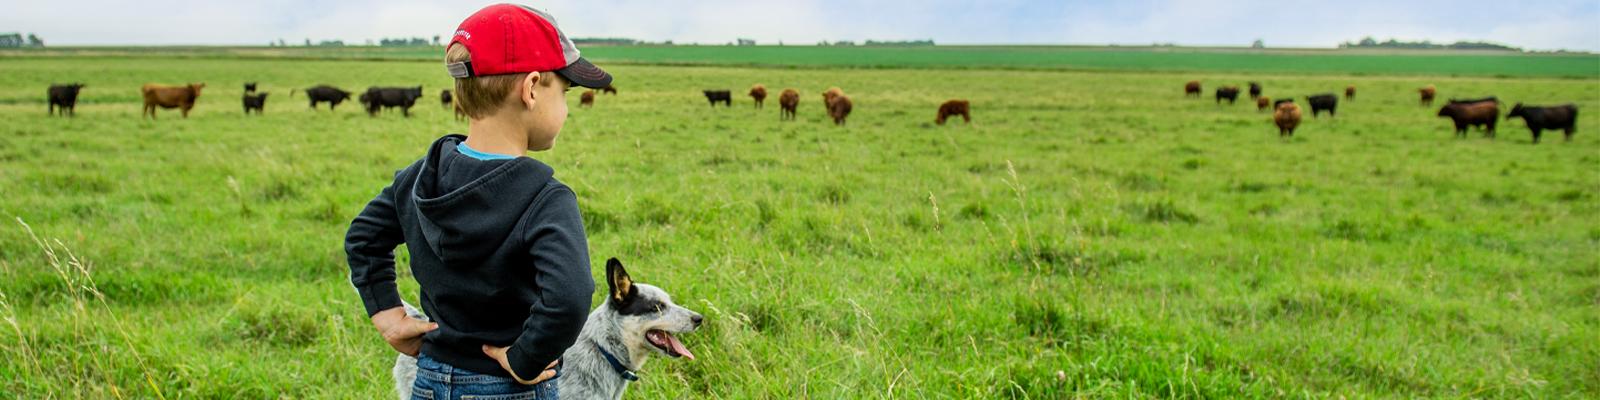 Boy and dog looking at cattle in the pasture